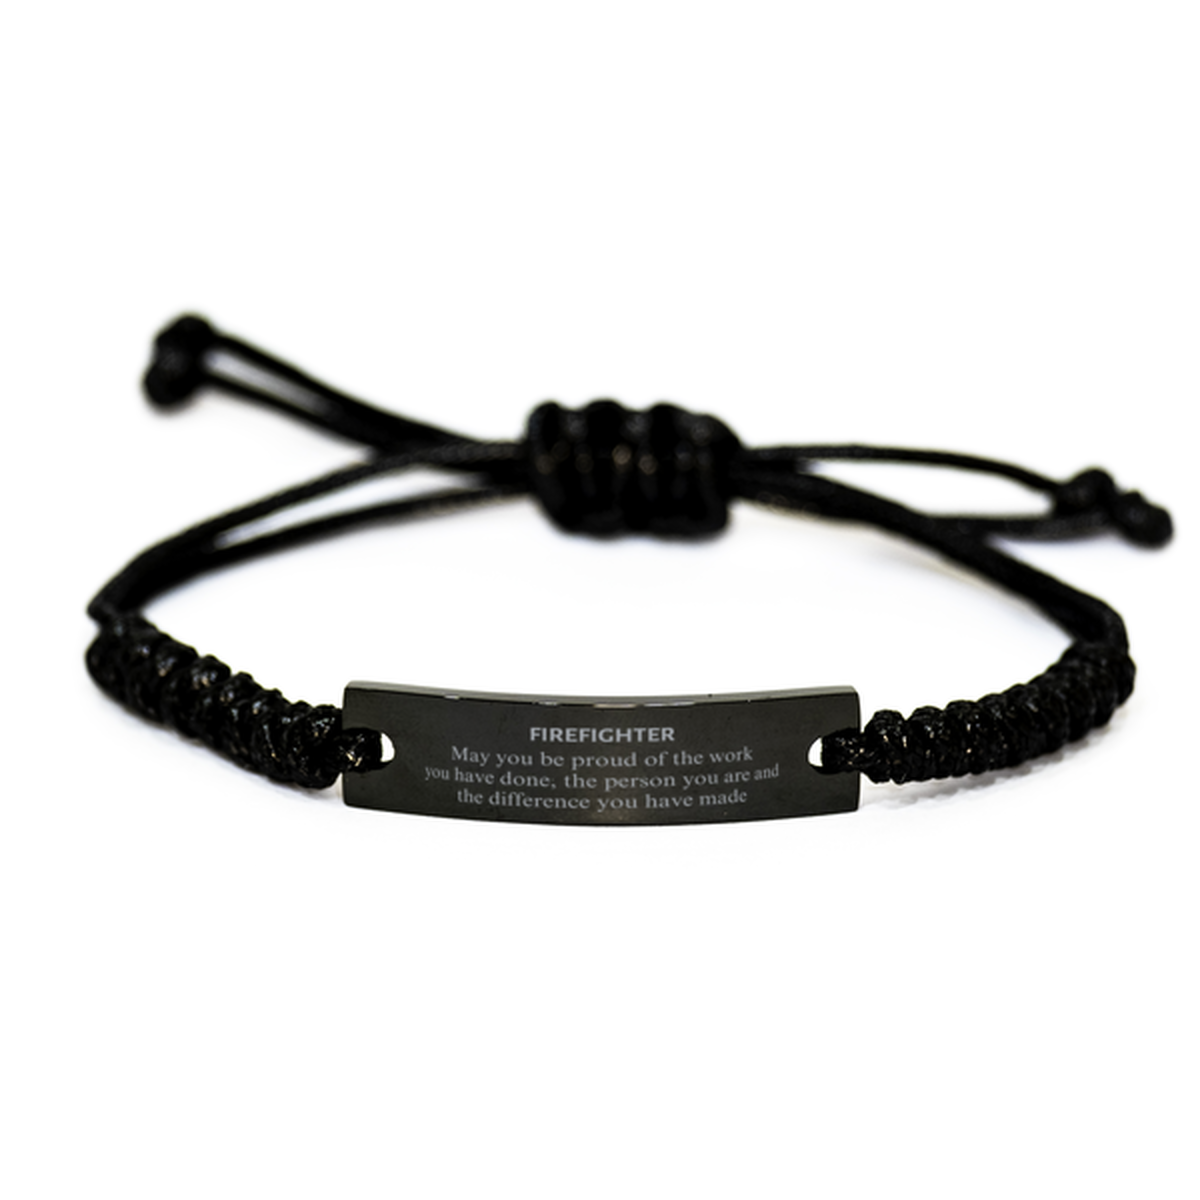 Firefighter May you be proud of the work you have done, Retirement Firefighter Black Rope Bracelet for Colleague Appreciation Gifts Amazing for Firefighter